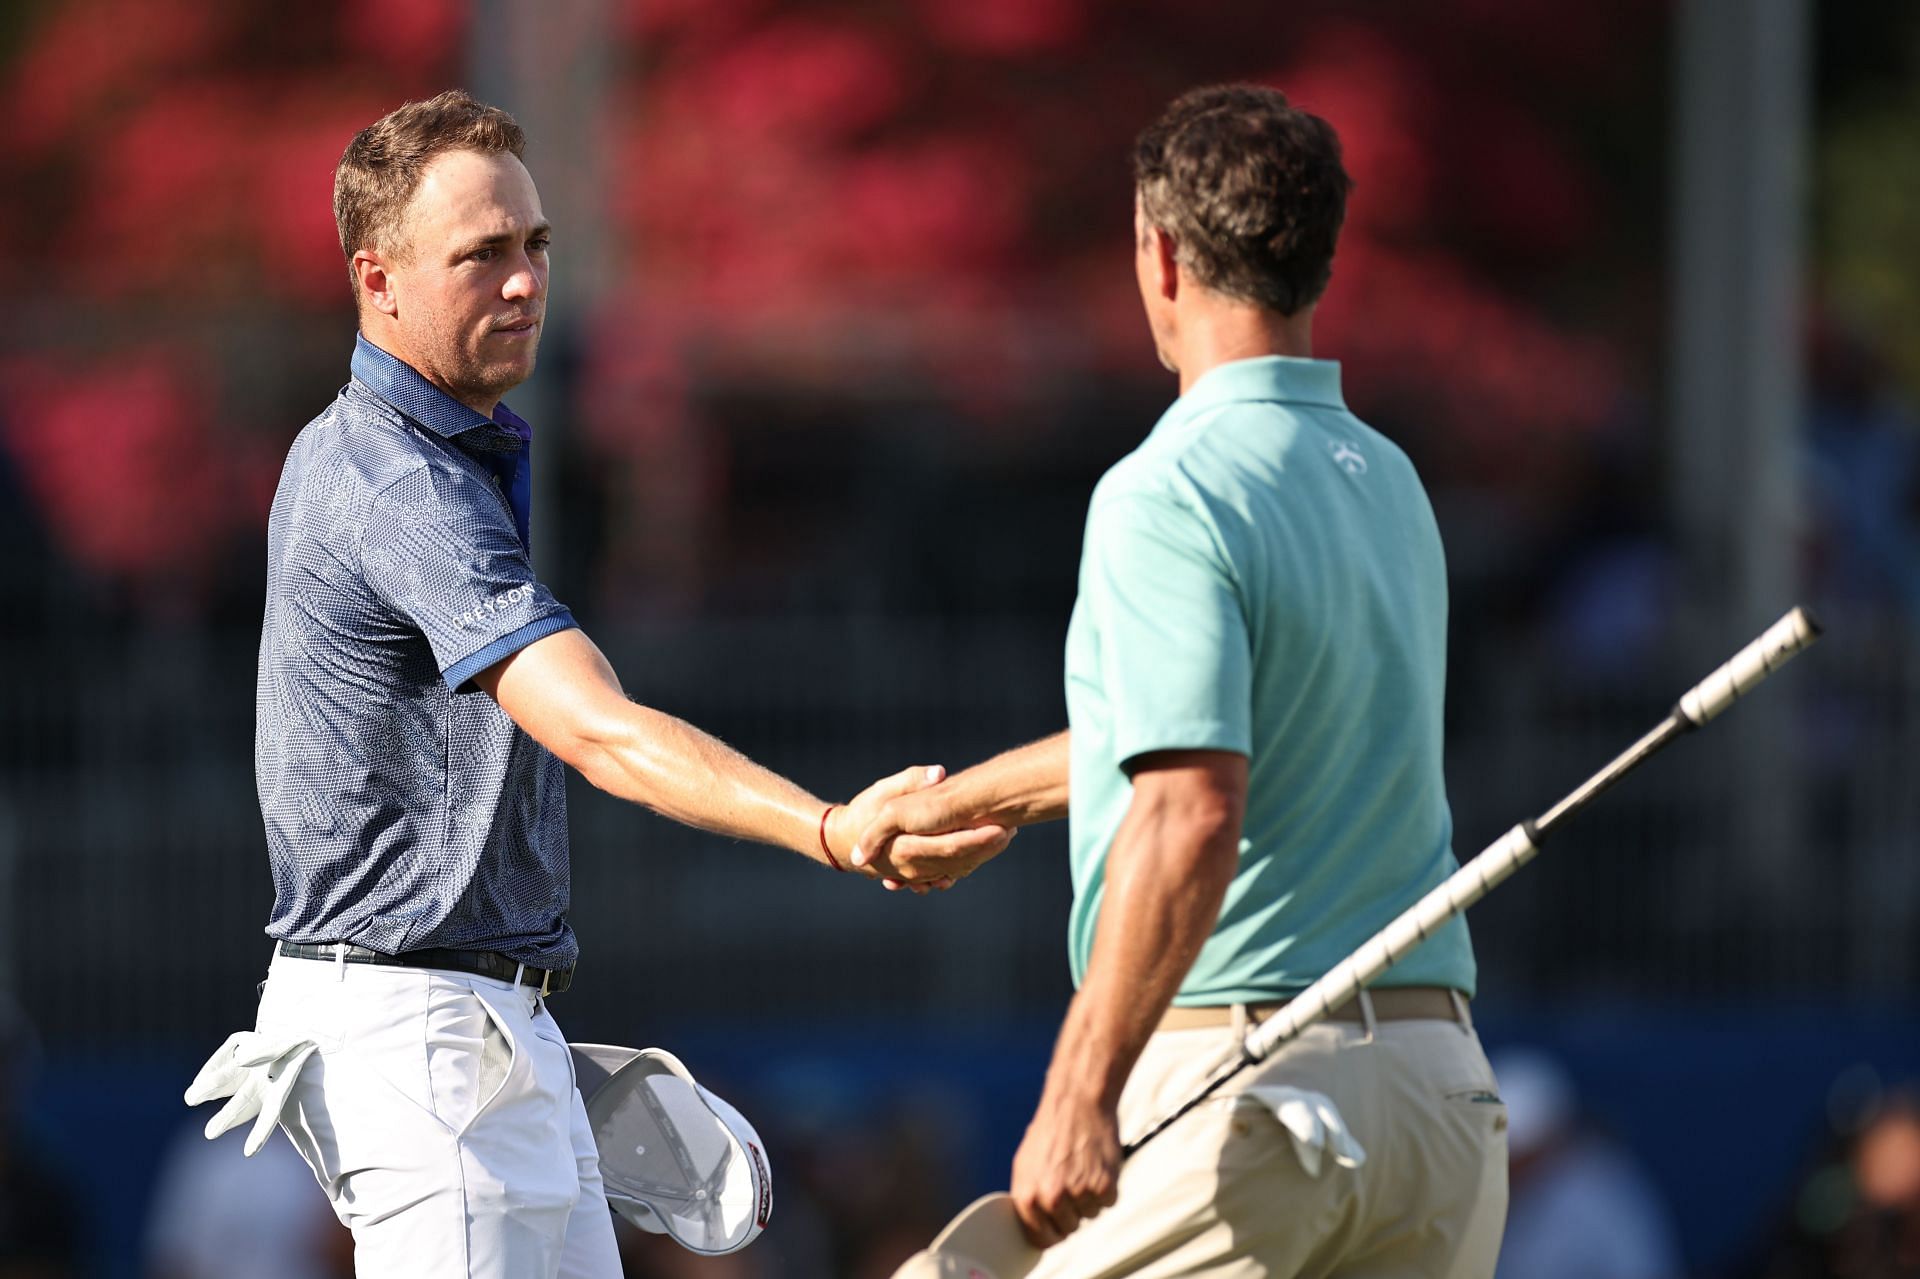 Justin Thomas shakes hands with Adam Scott on the 18th green during the second round of the Wyndham Championship